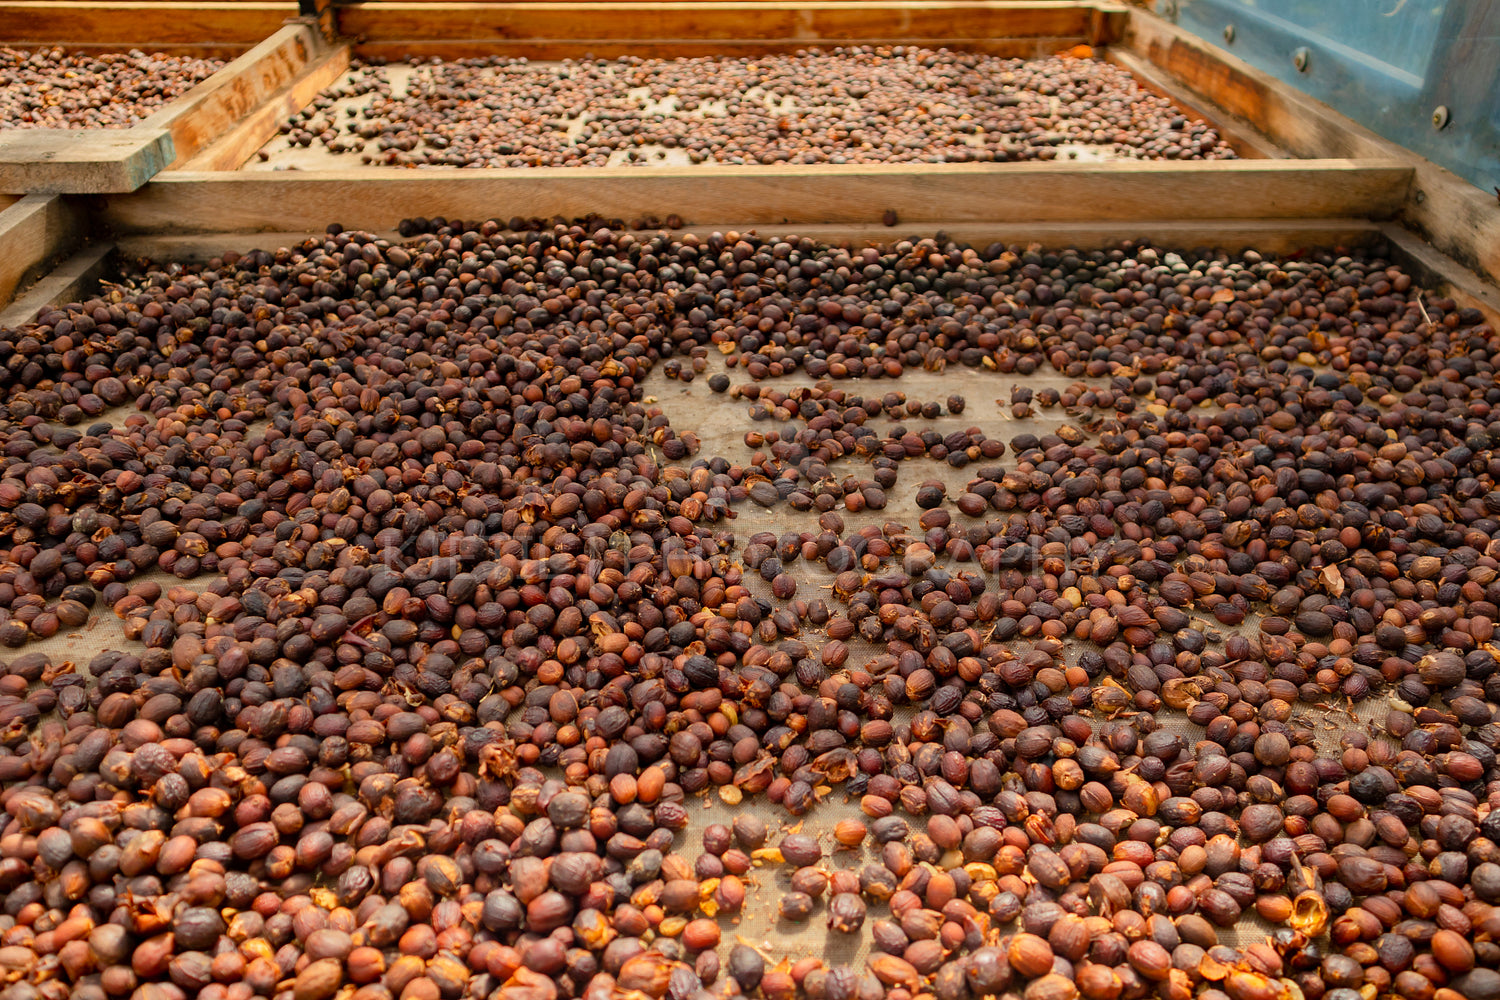 Raw Coffee Beans Drying In Wooden Crate